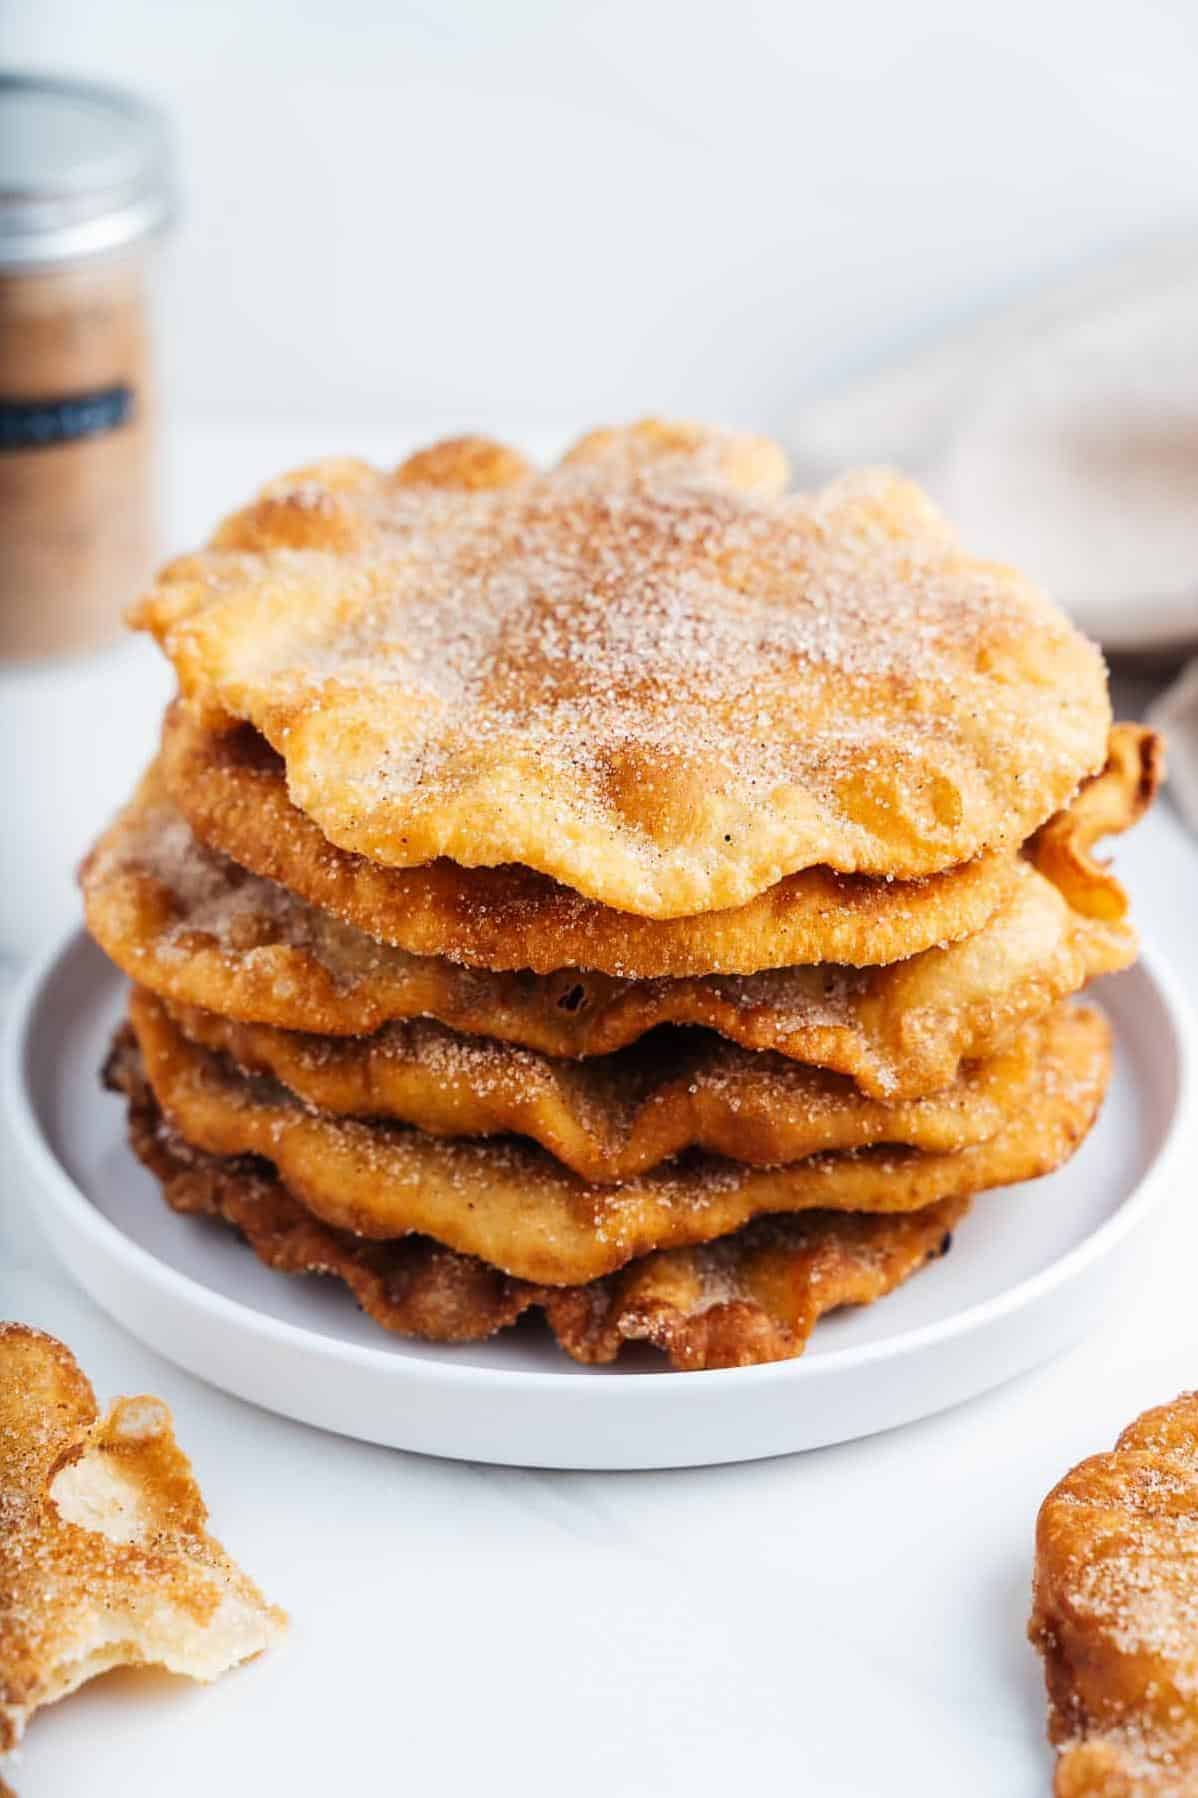  One bite of these crispy, fluffy bunuelos and you'll be hooked!